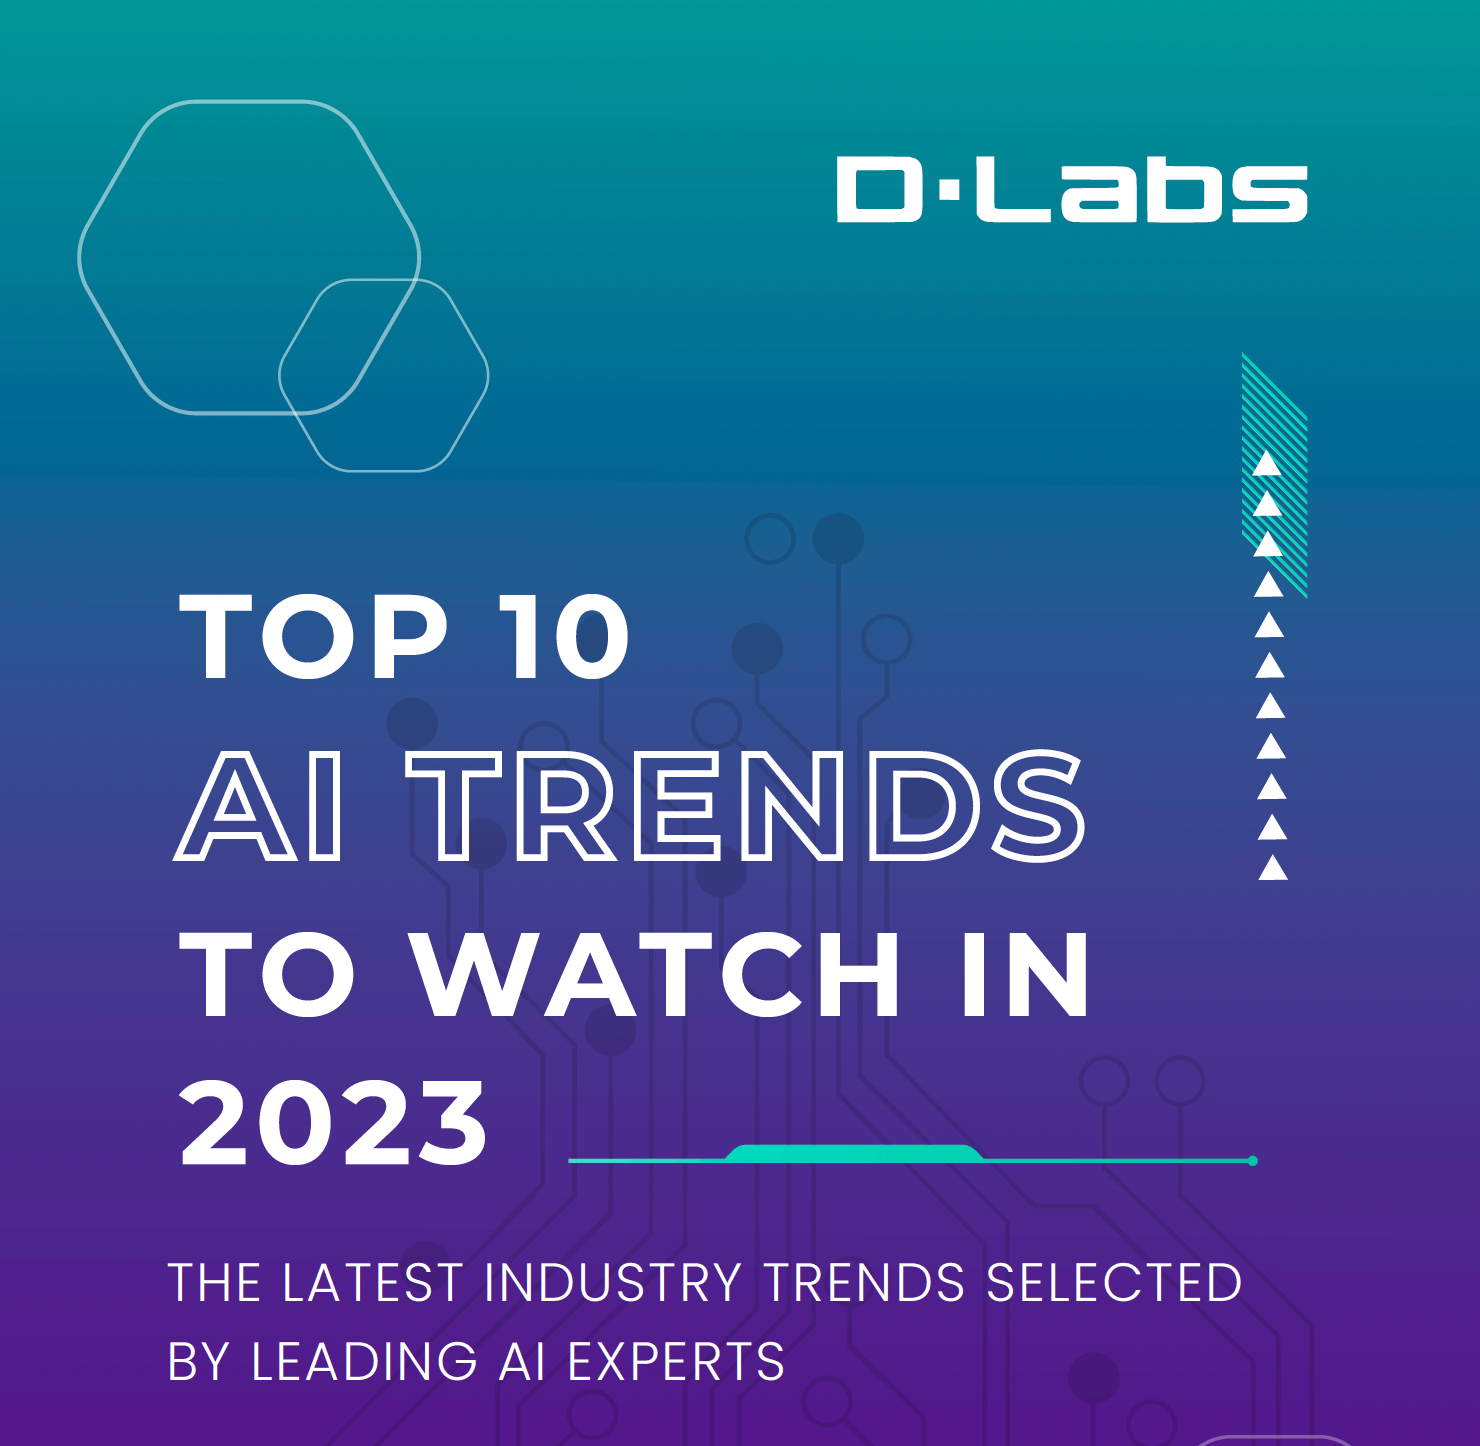 Top 10 AI Trends to watch in 2023